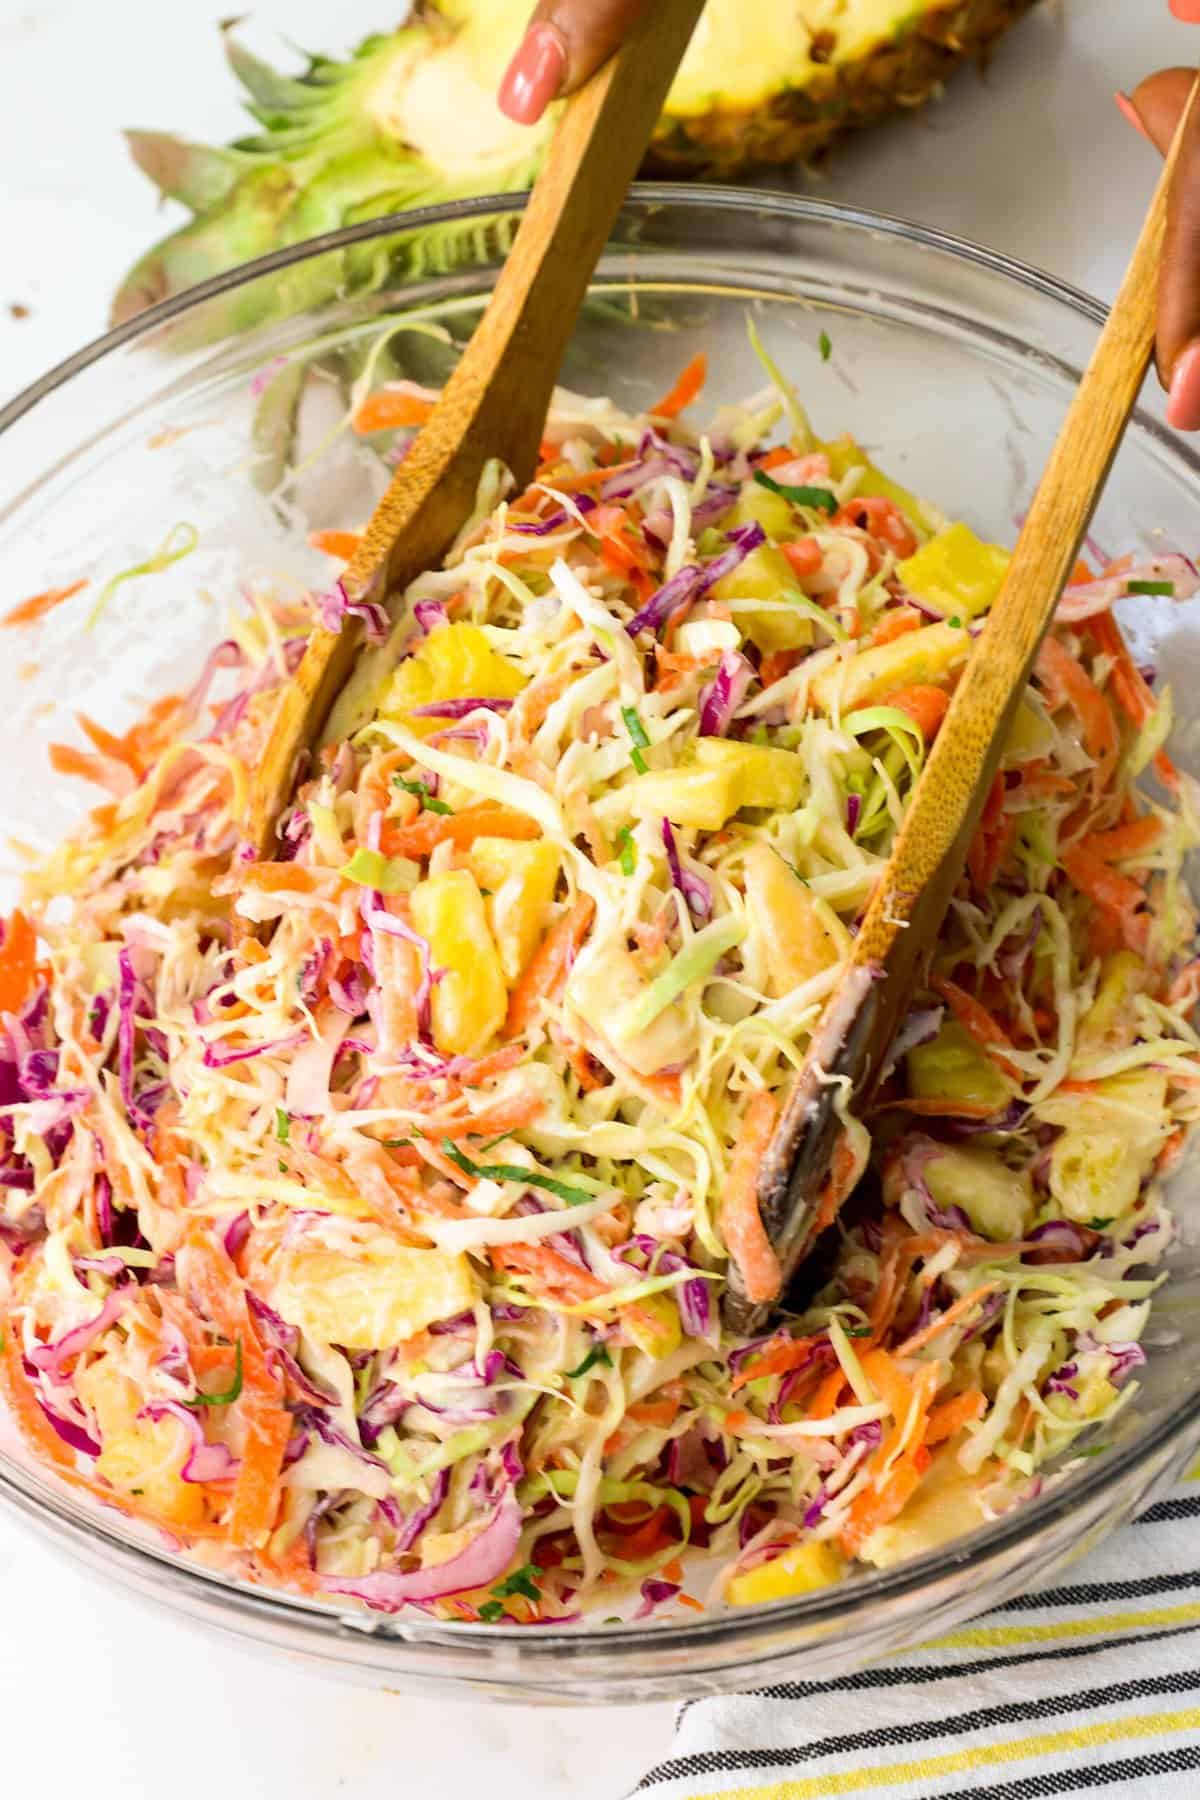 Serving up refreshingly tropical pineapple coleslaw